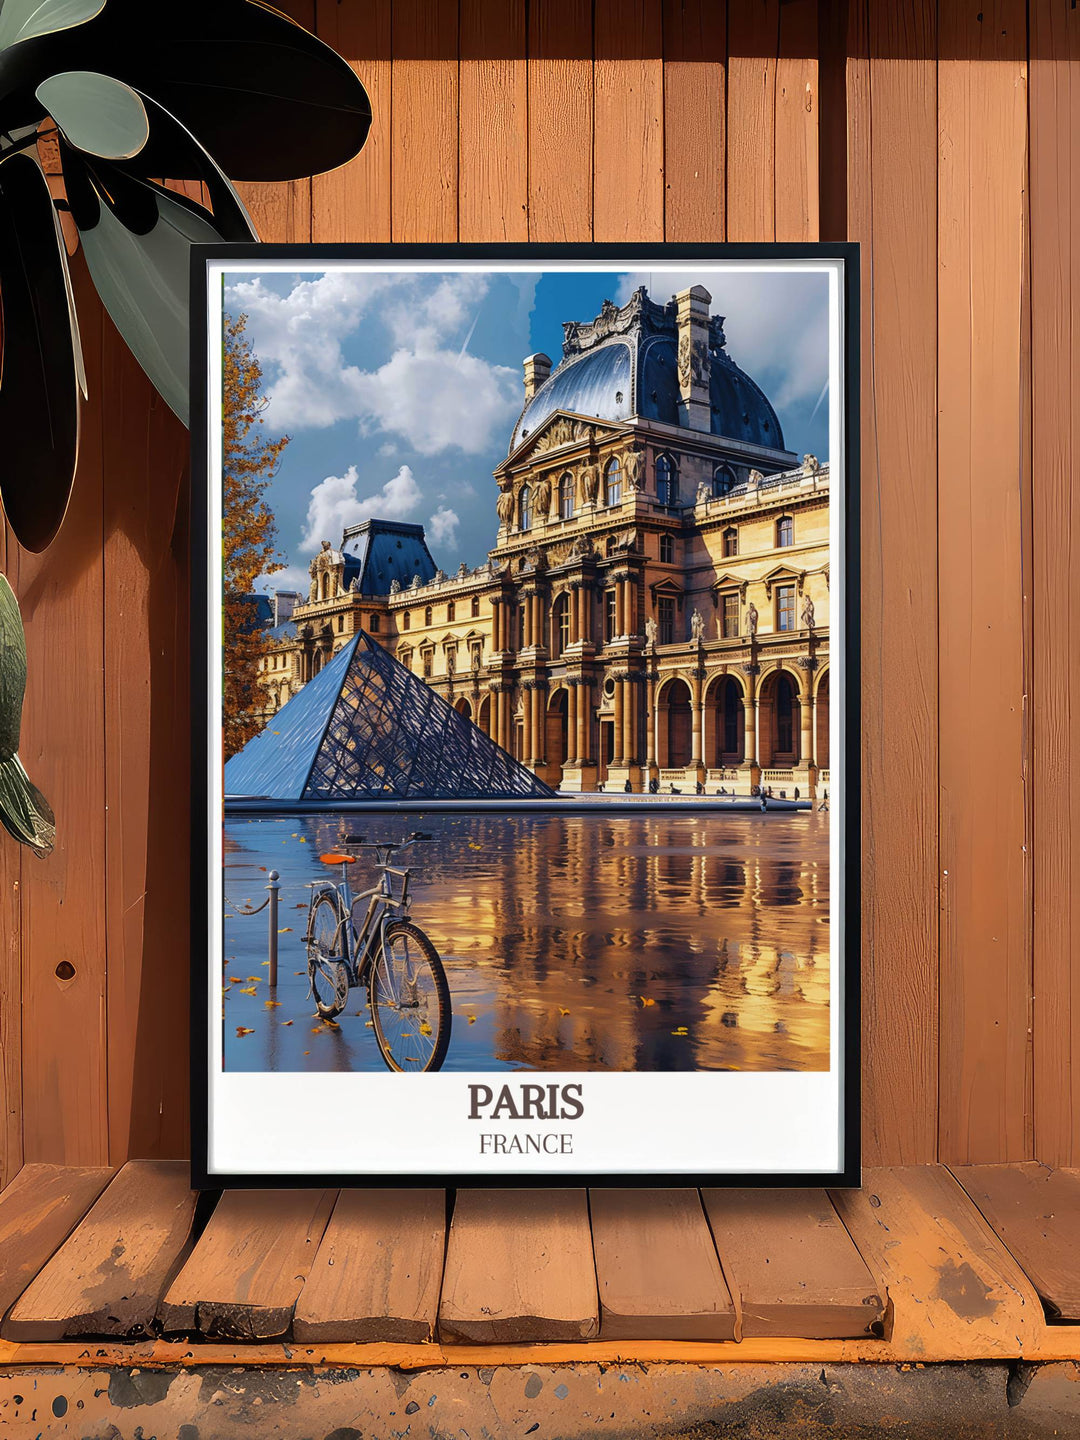 Retro style travel posters of Paris, reminiscent of the golden age of travel, capturing the excitement and glamour of exploring the City of Light.